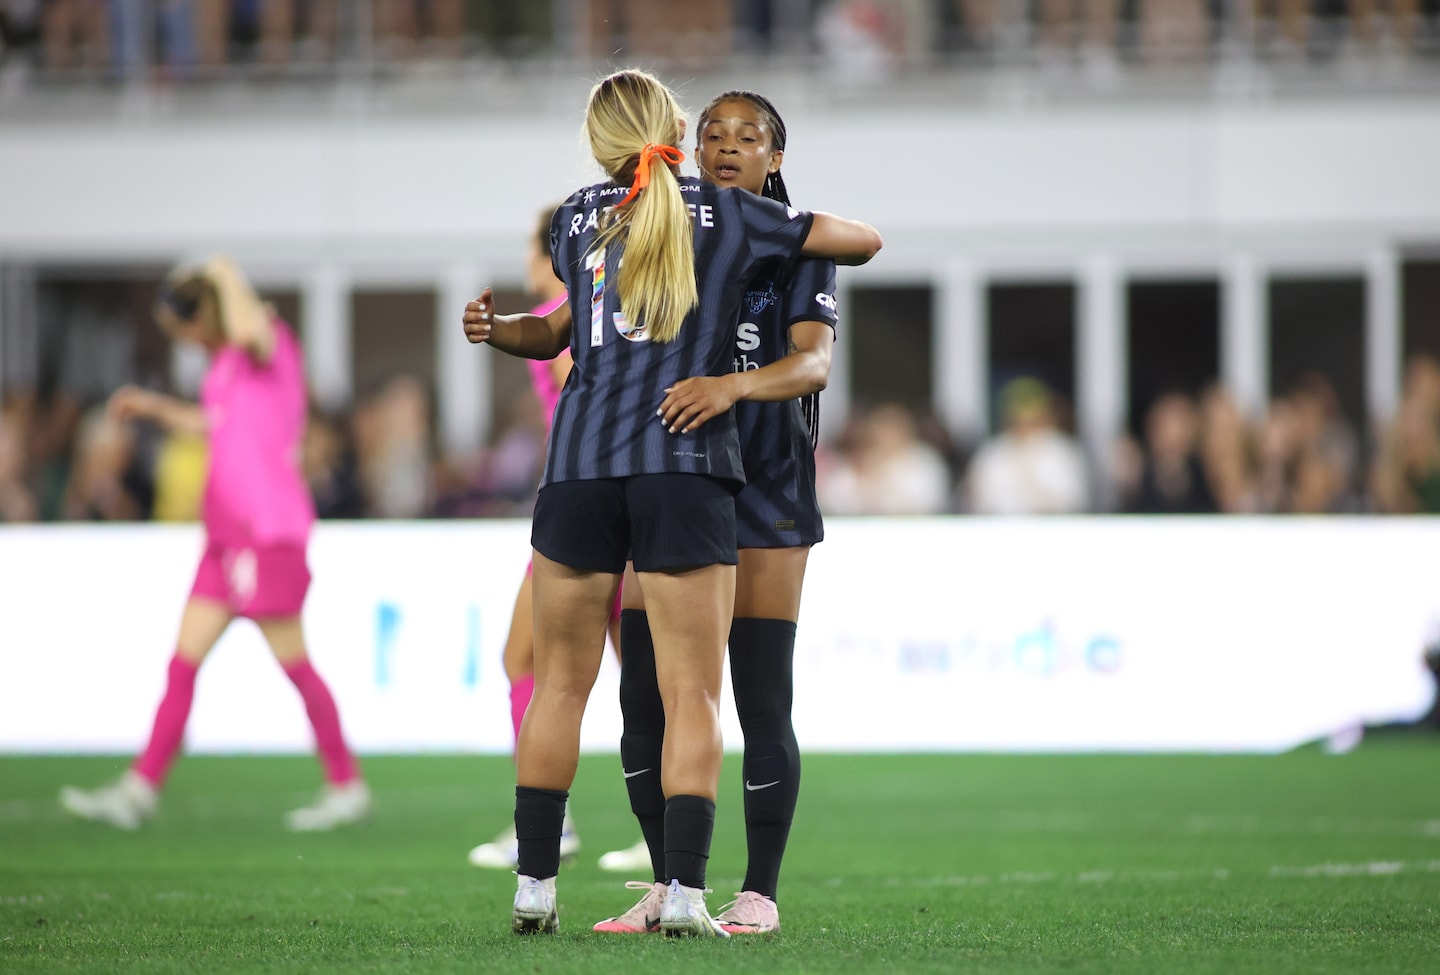 Croix Bethune nets late equalizer for Spirit before record crowd